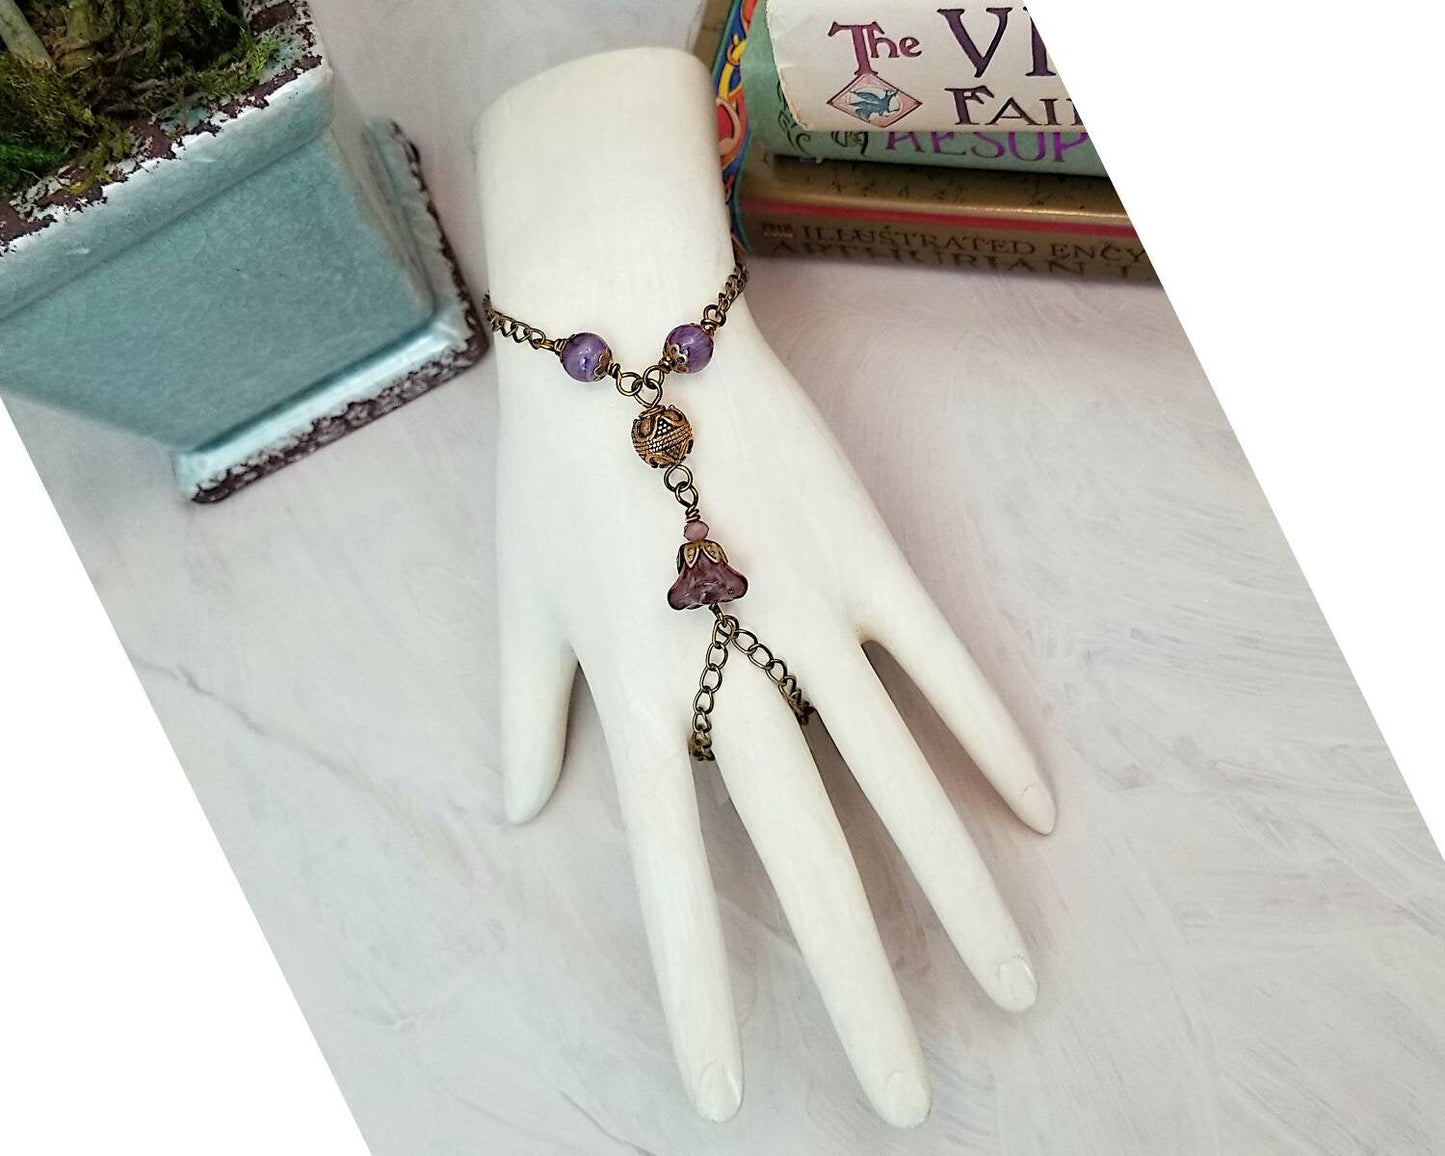 Wire Wrapped Hand Flower Bracelet in Purple, Boho, Bohemian, Gypsy, Wedding, Bridesmaid, Renaissance,Medieval,Choice of Colors and Metals